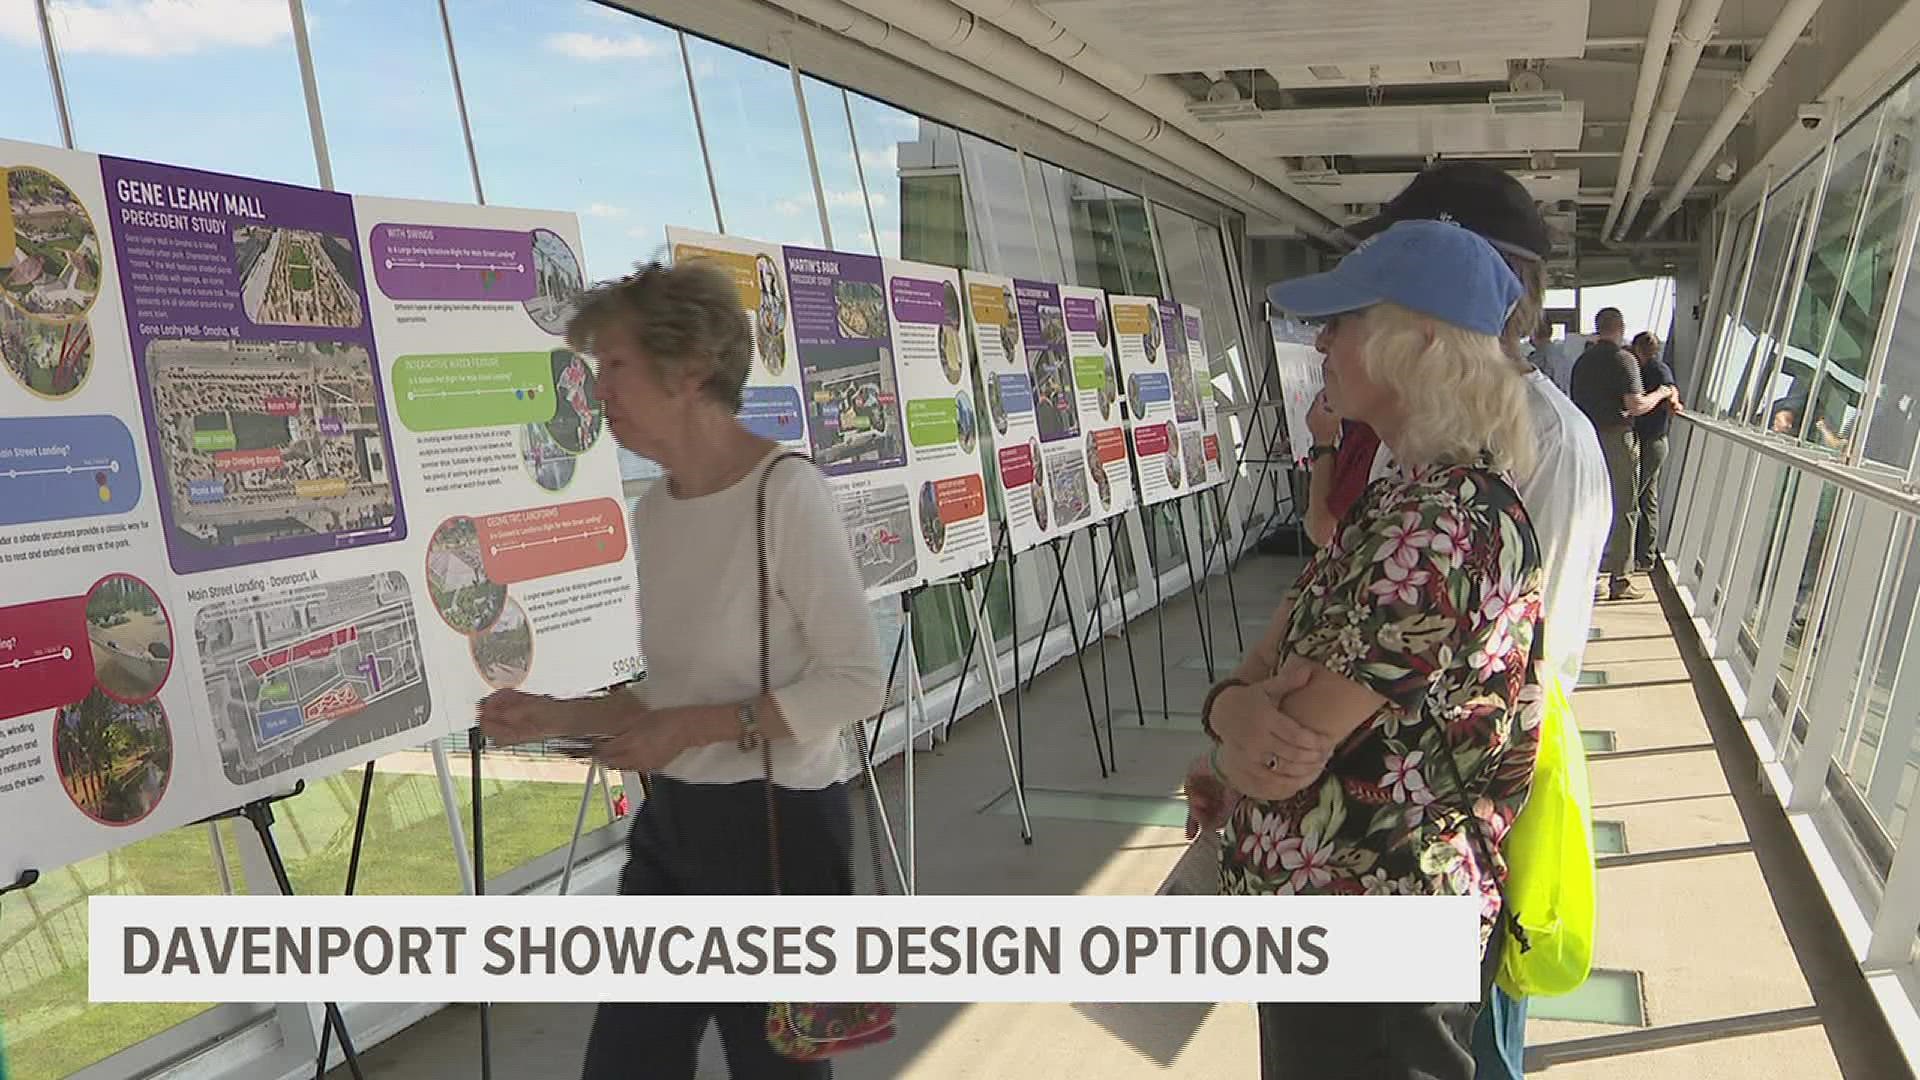 While it's still early in the design process, the City of Davenport collected ideas and opinions for features and designs planned for the new Main Street Landing.